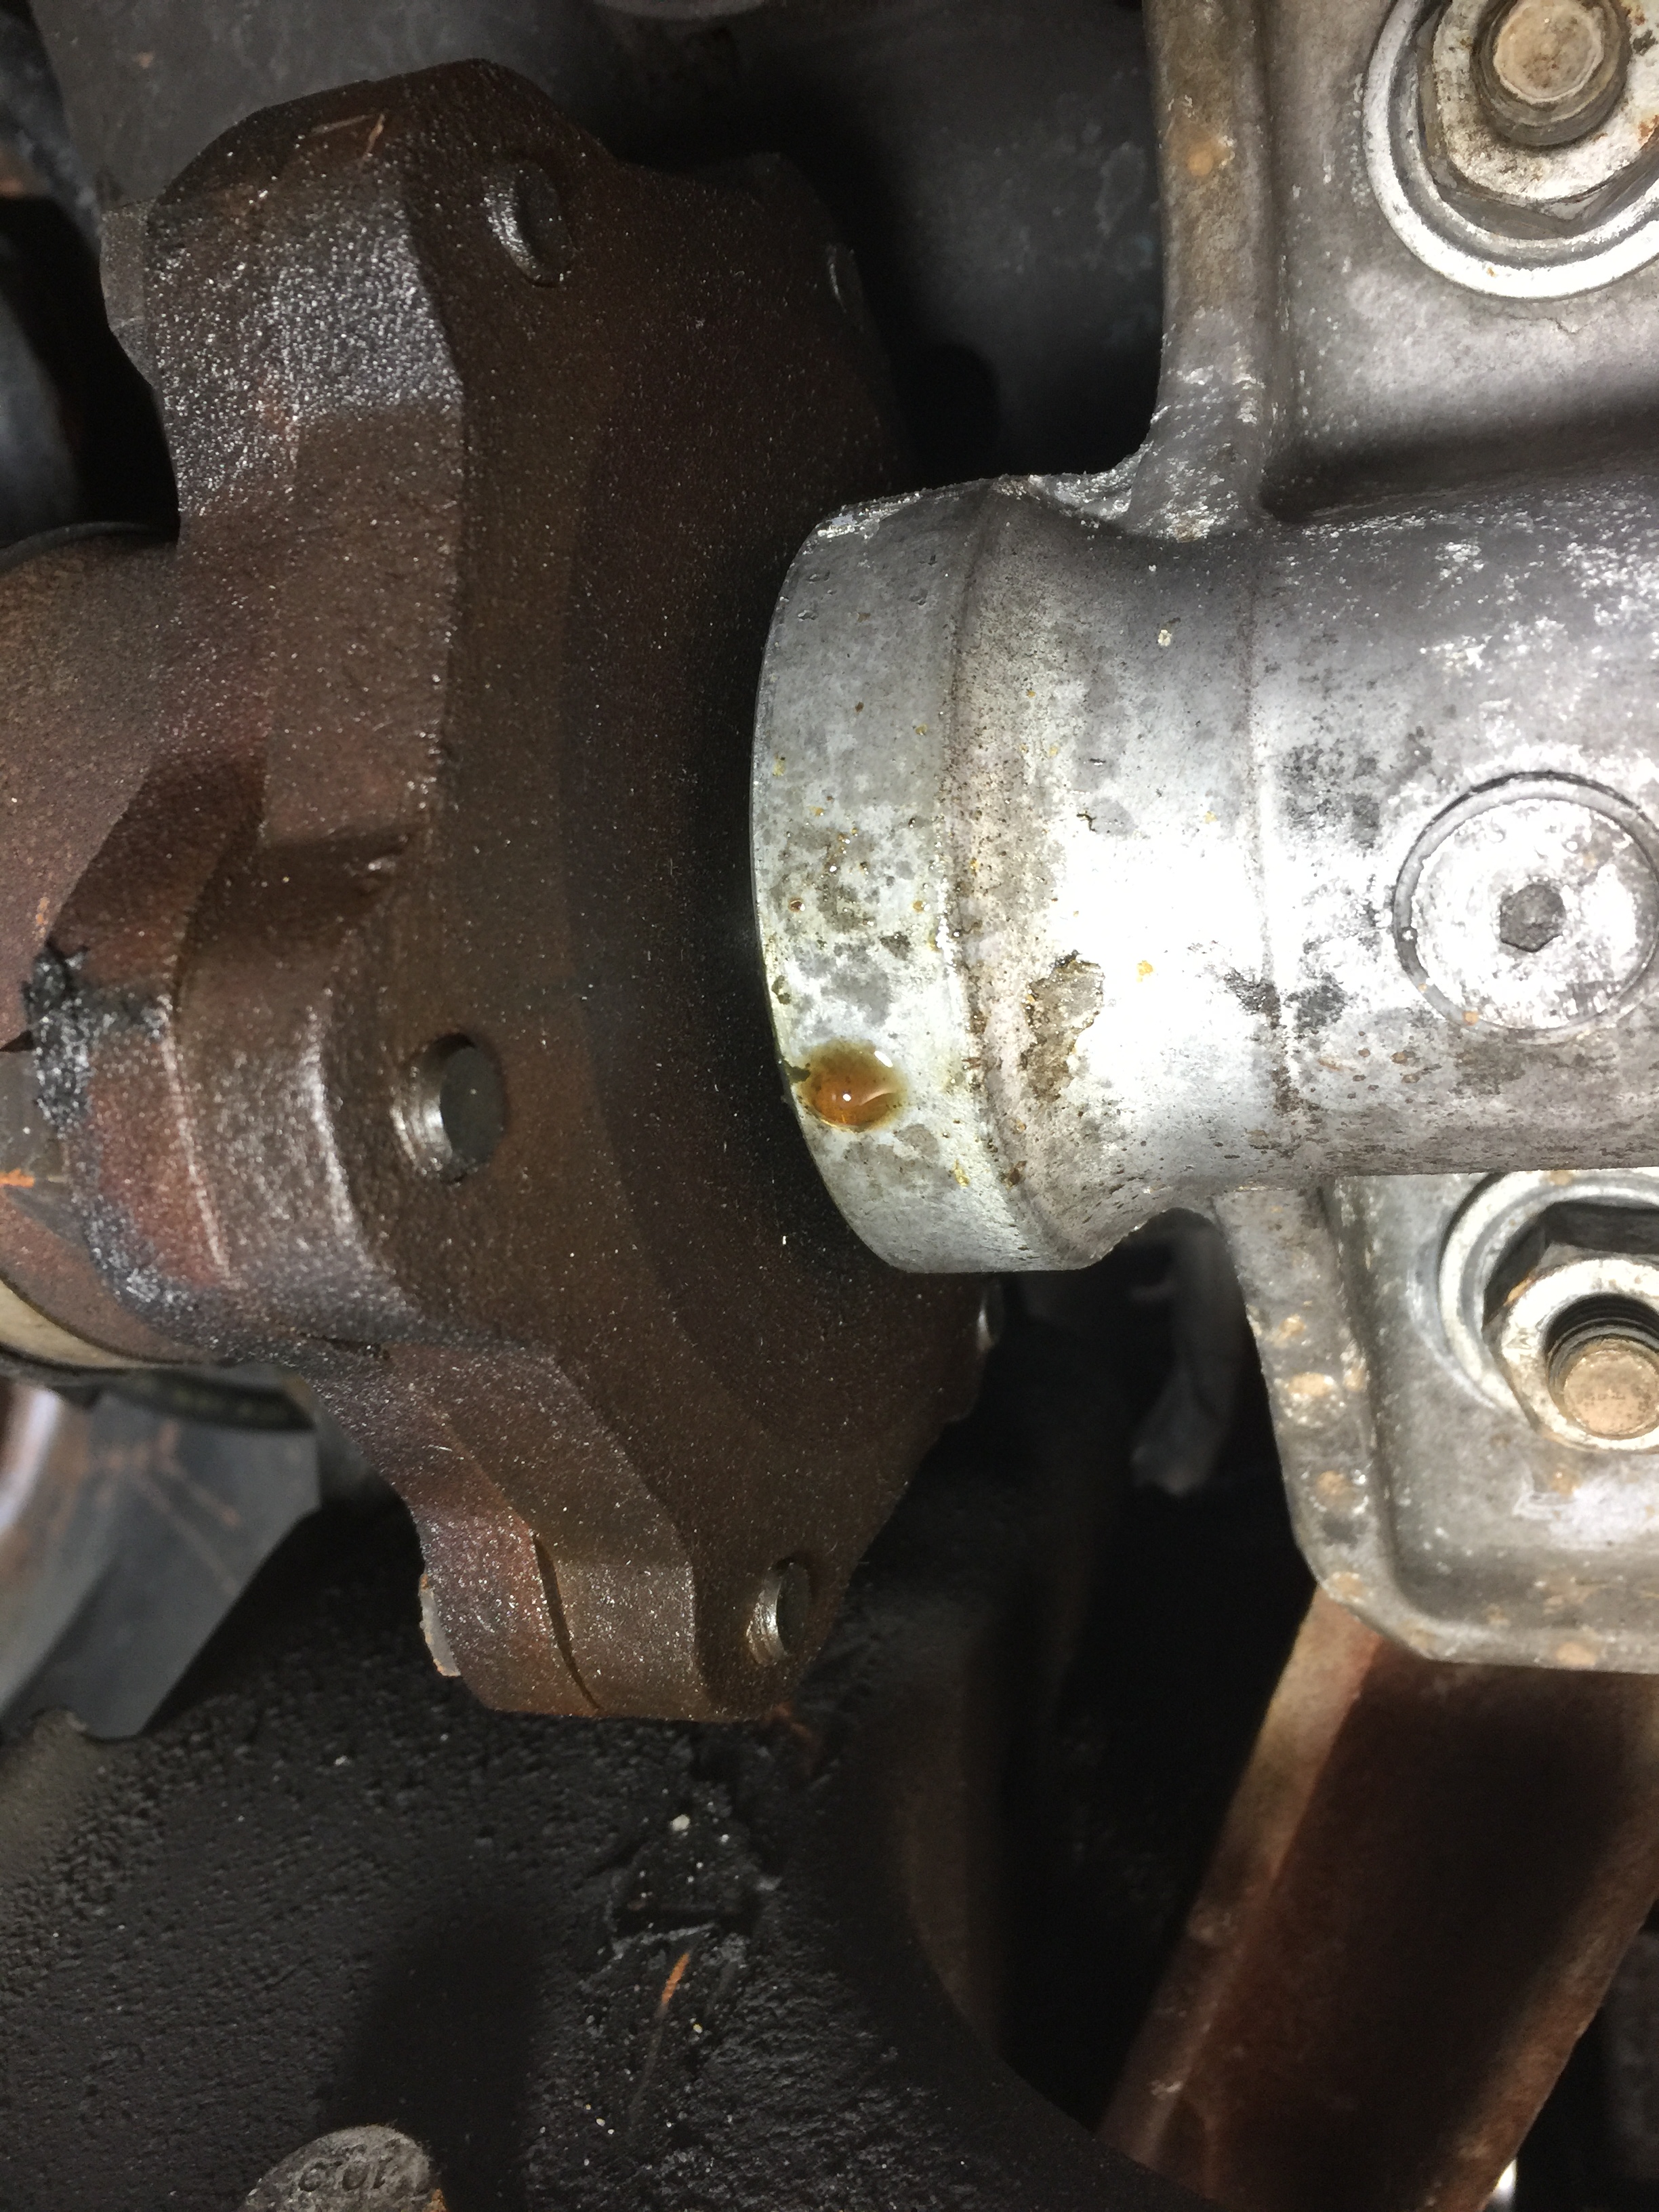 07 tahoe ltz 4wd 2nd time replacing front right axle seal chevrolet forum chevy enthusiasts forums